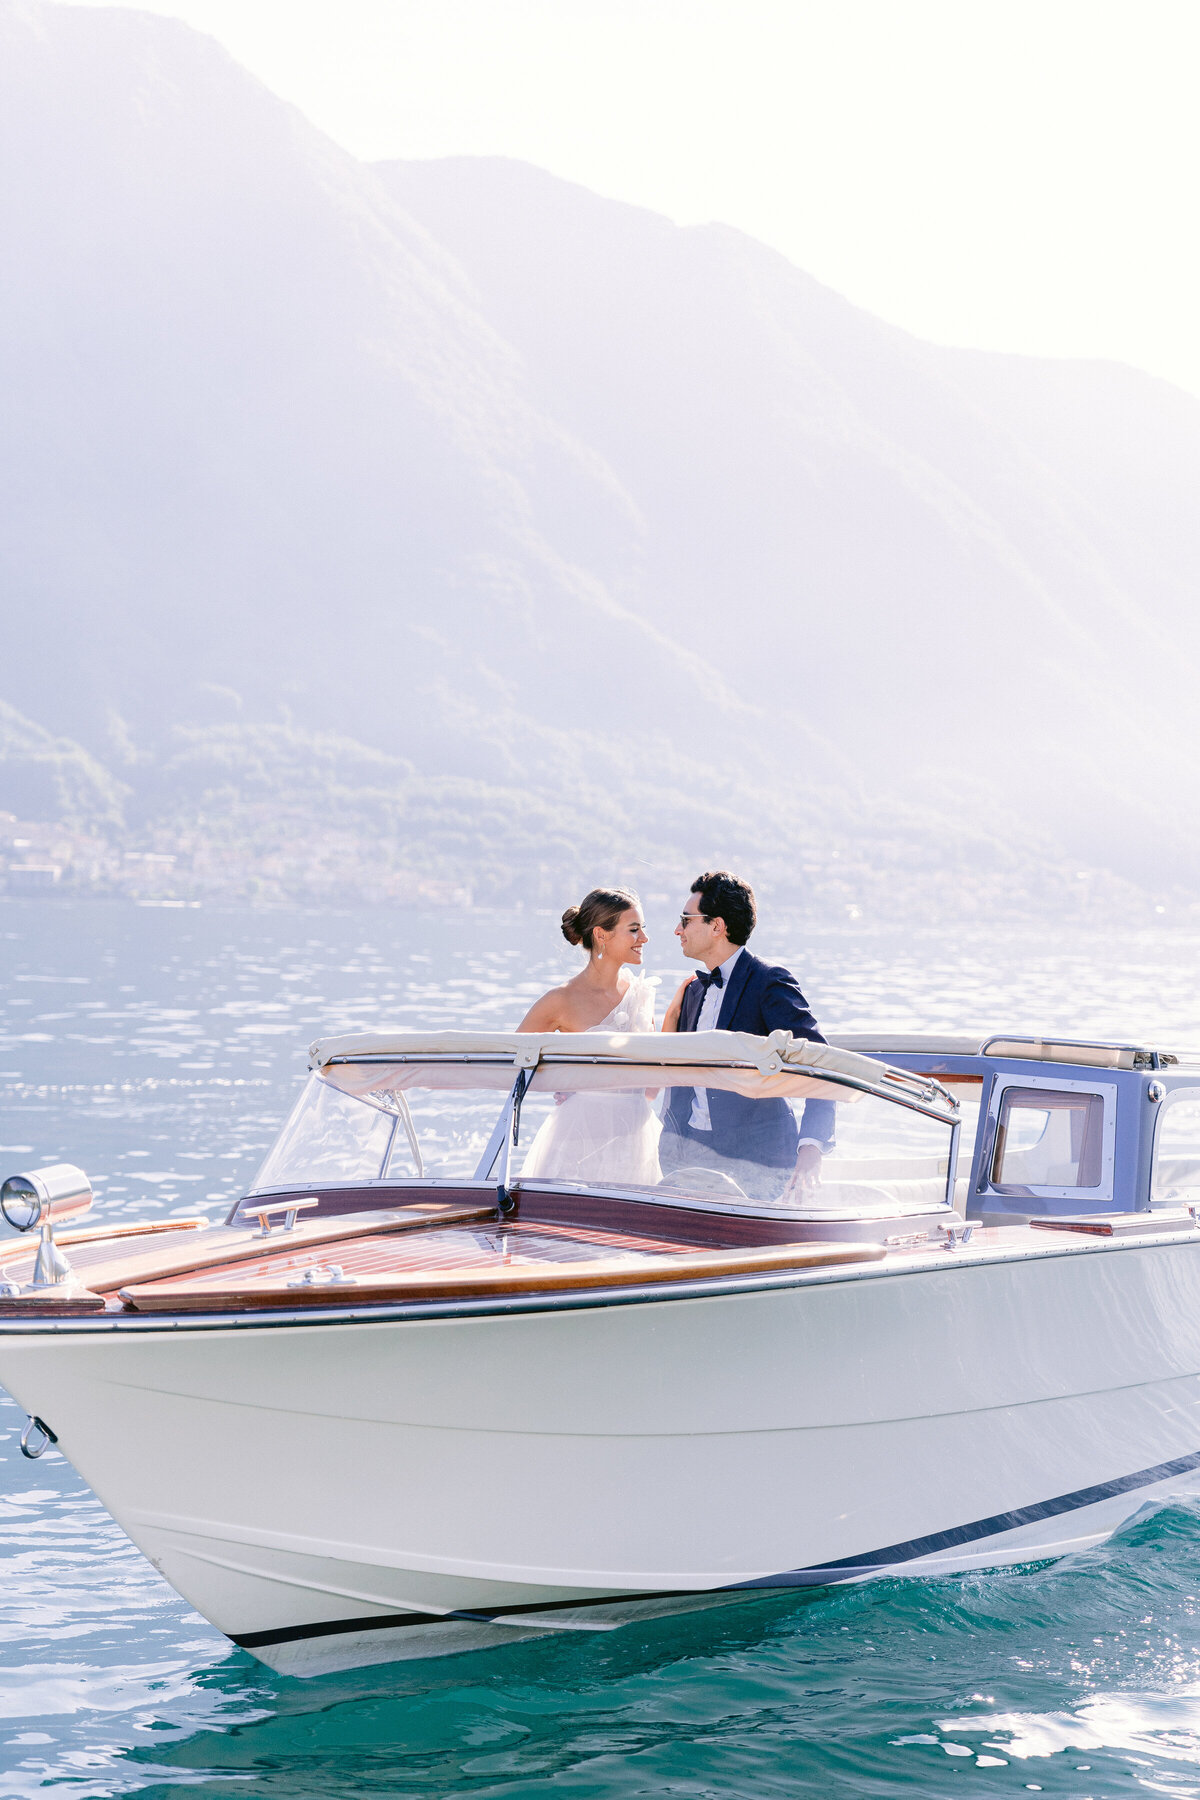 Couple on a private boat on lake como by White Orchid Photography, destination wedding photographer